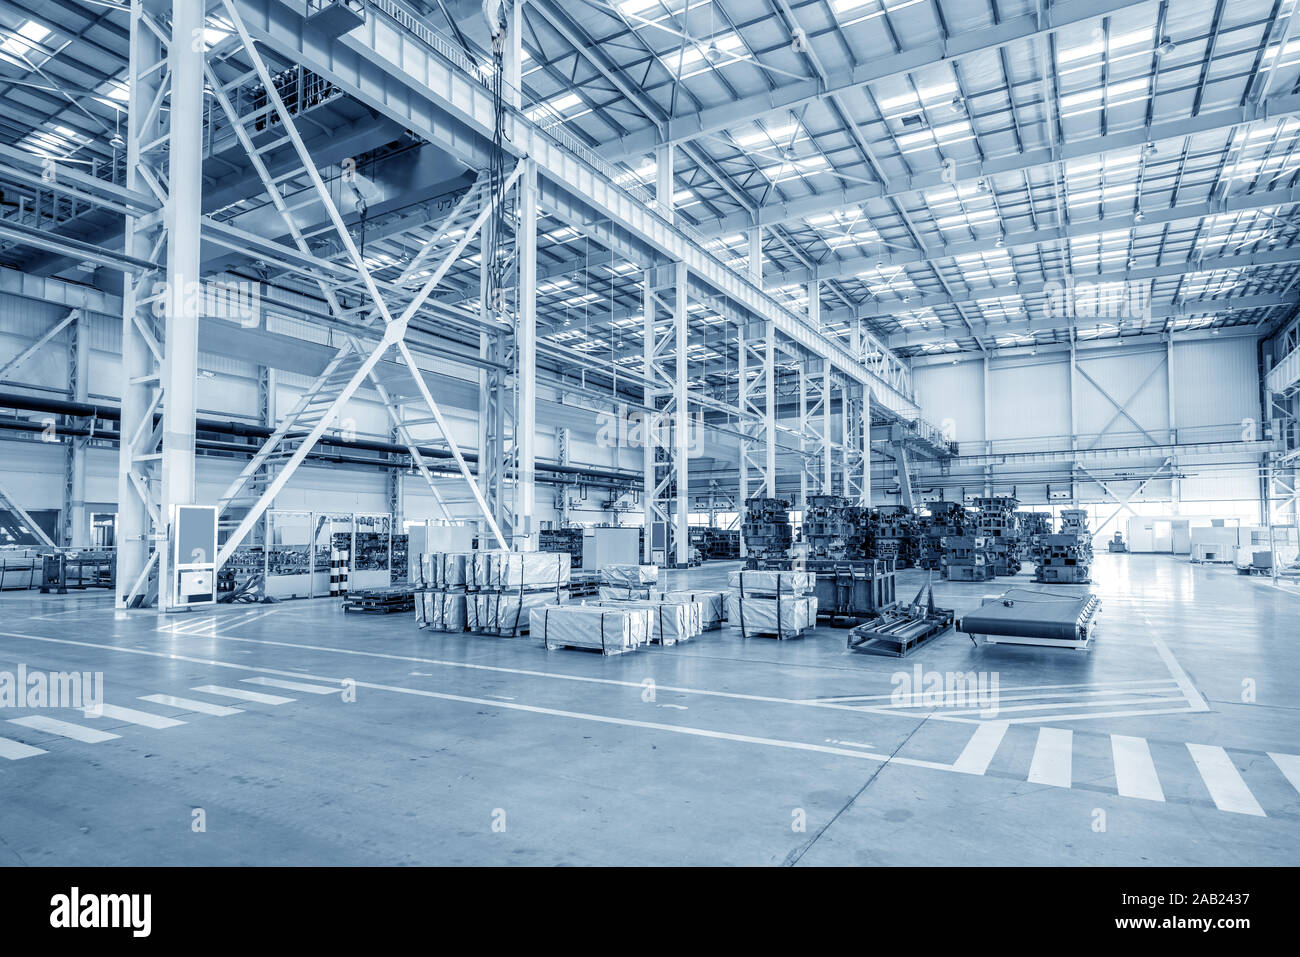 The interior of a big industrial building or factory with steel constructions Stock Photo